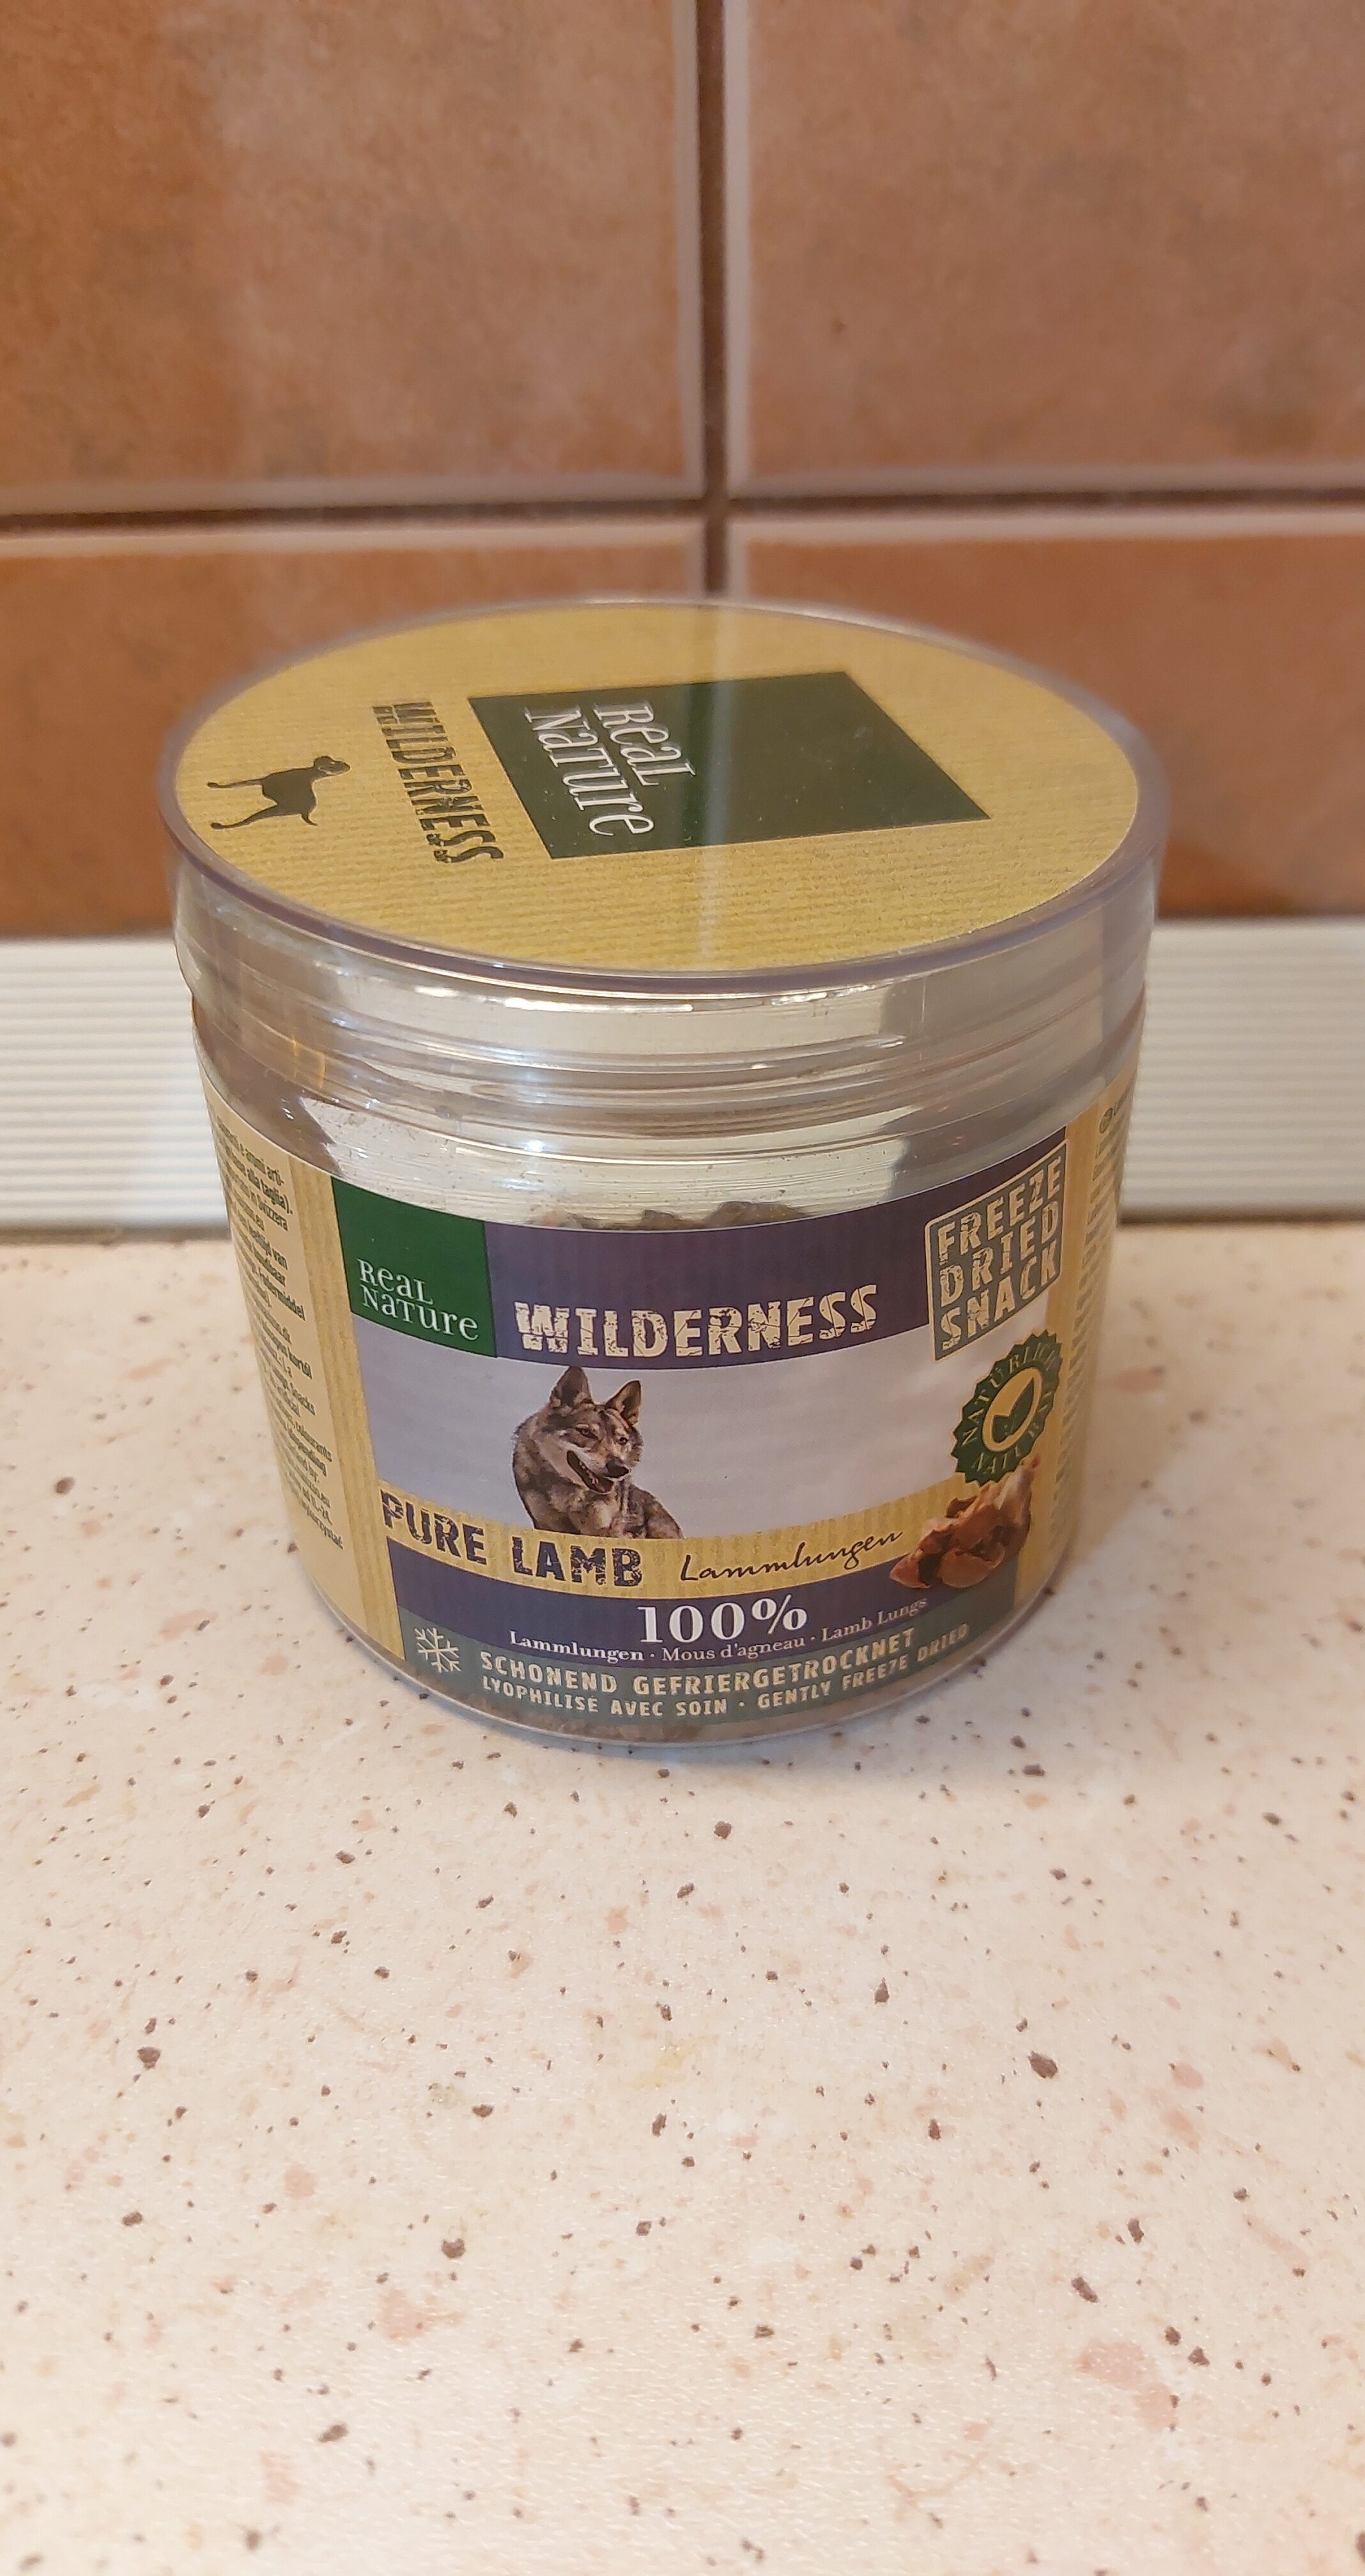 Real Nature Wilderness Freeze dried - Product - hu